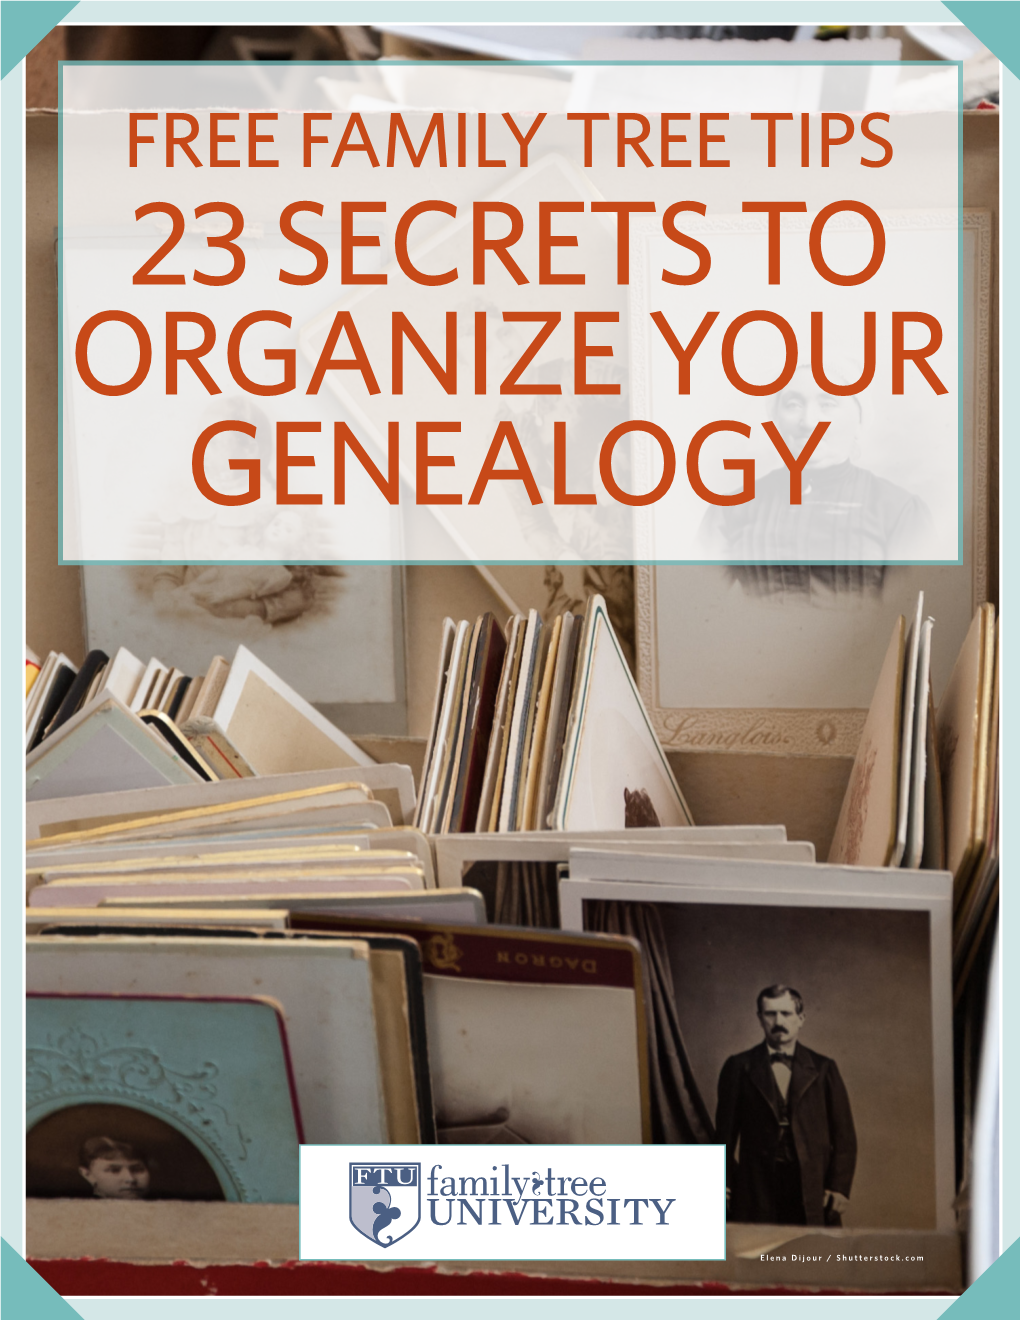 FREE FAMILY TREE TIPS: 23 SECRETS to ORGANIZE YOUR GENEALOGY 8 Space-Saving Strategies for Your Genealogy